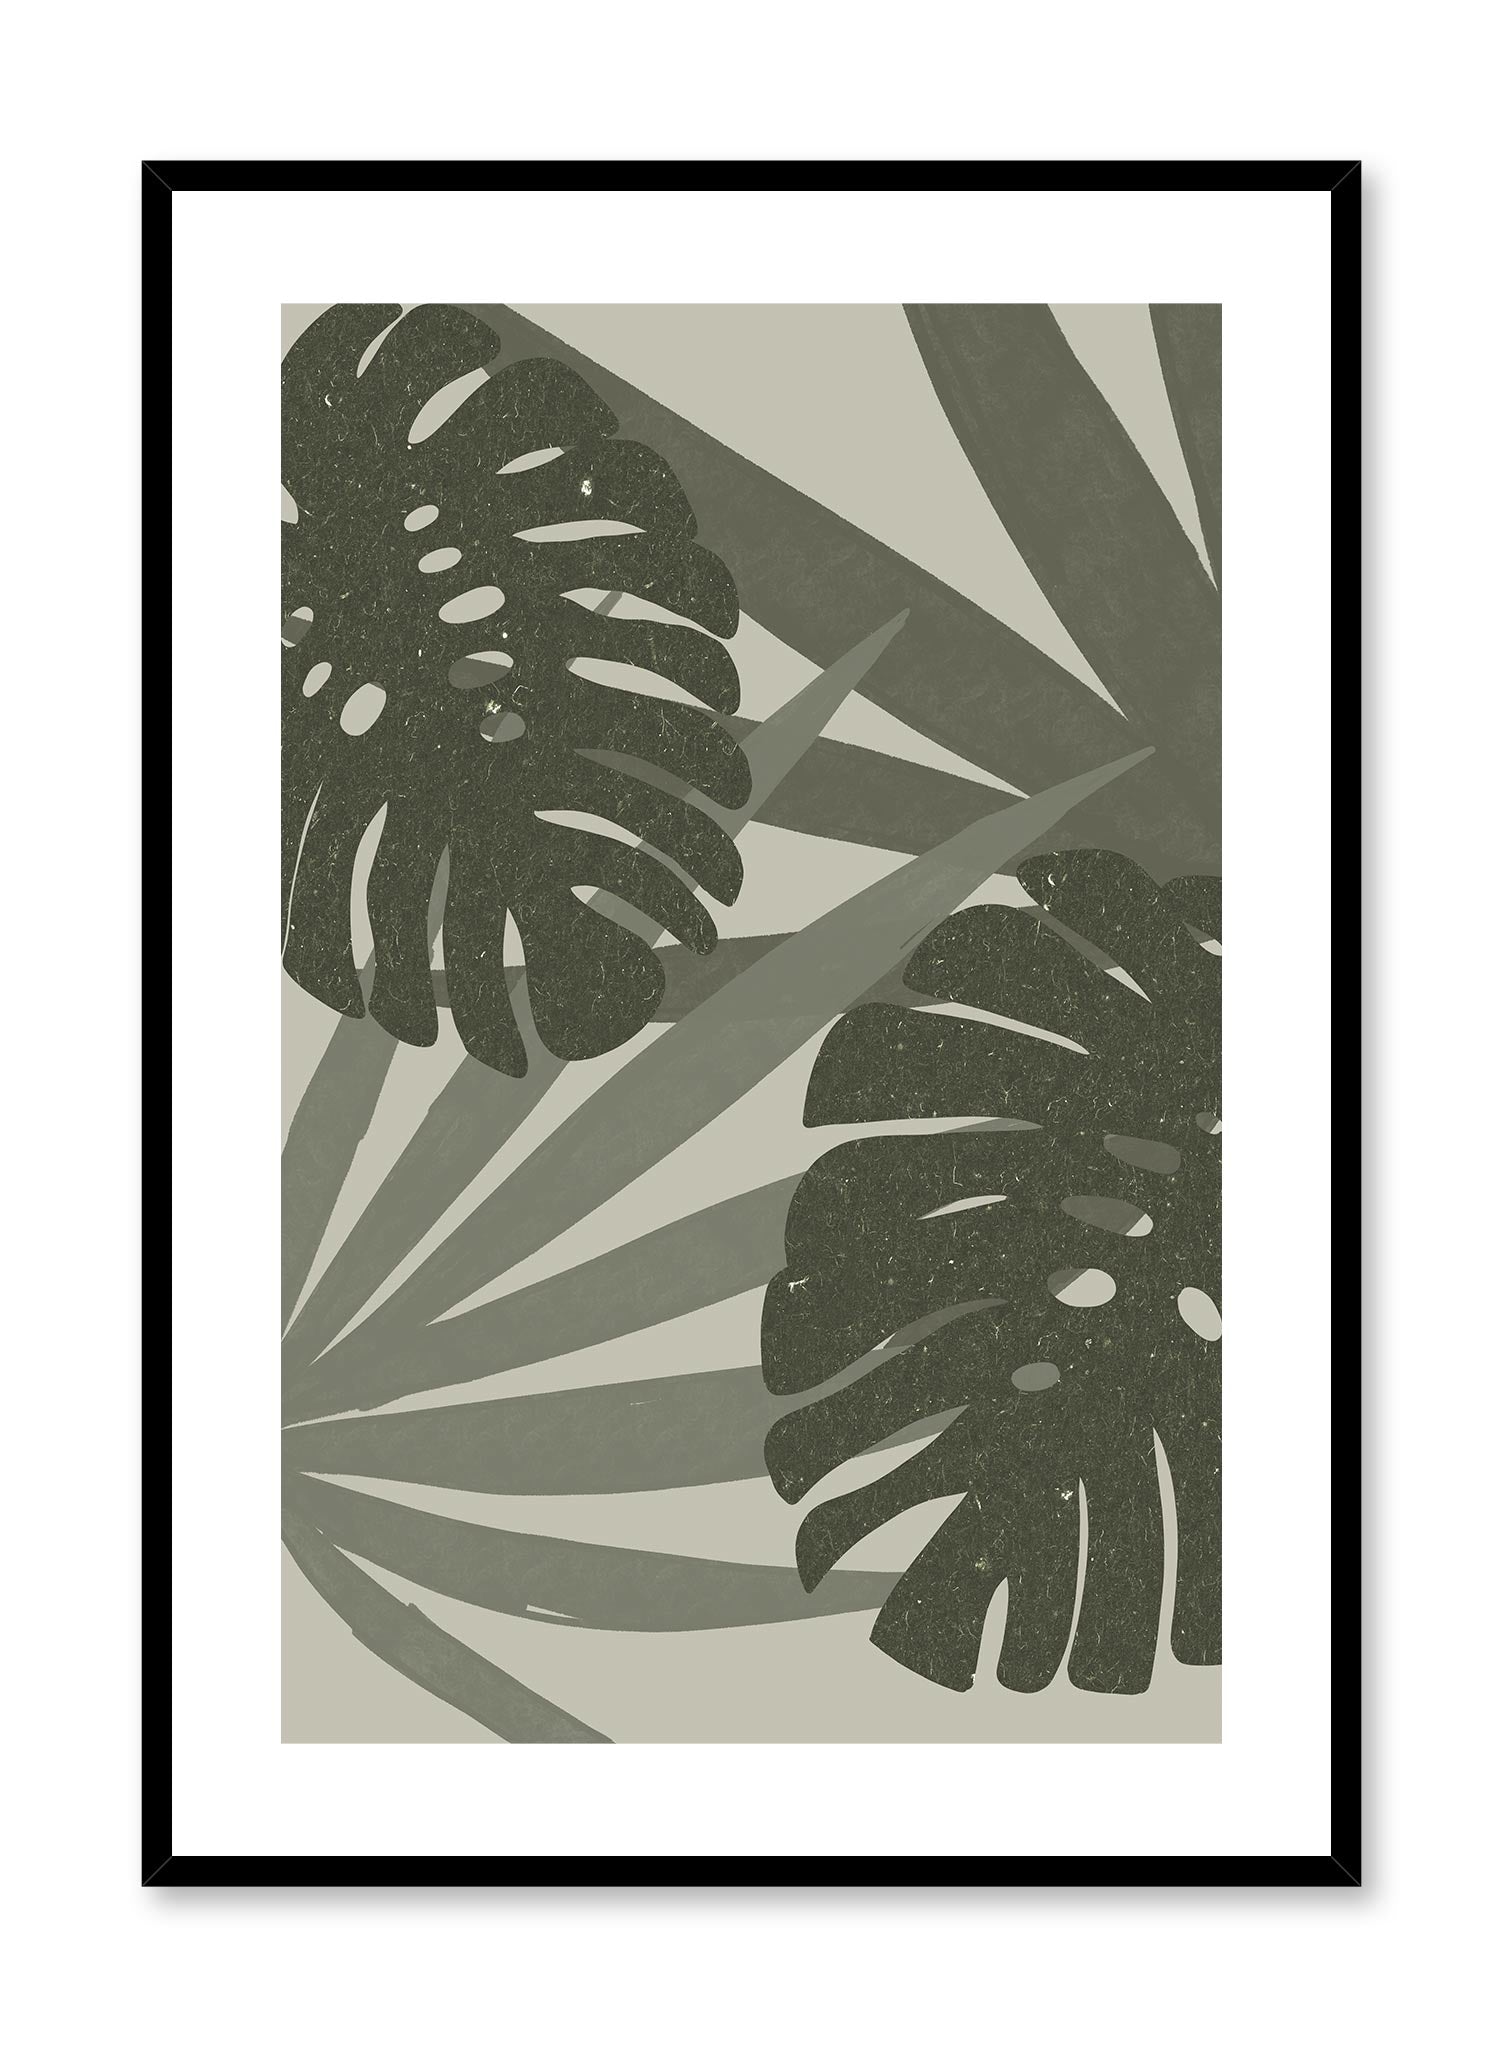 Tropical Garden is a minimalist illustration of a collection of monstera leaves and palm leaves superposed on top of each other by Opposite Wall.